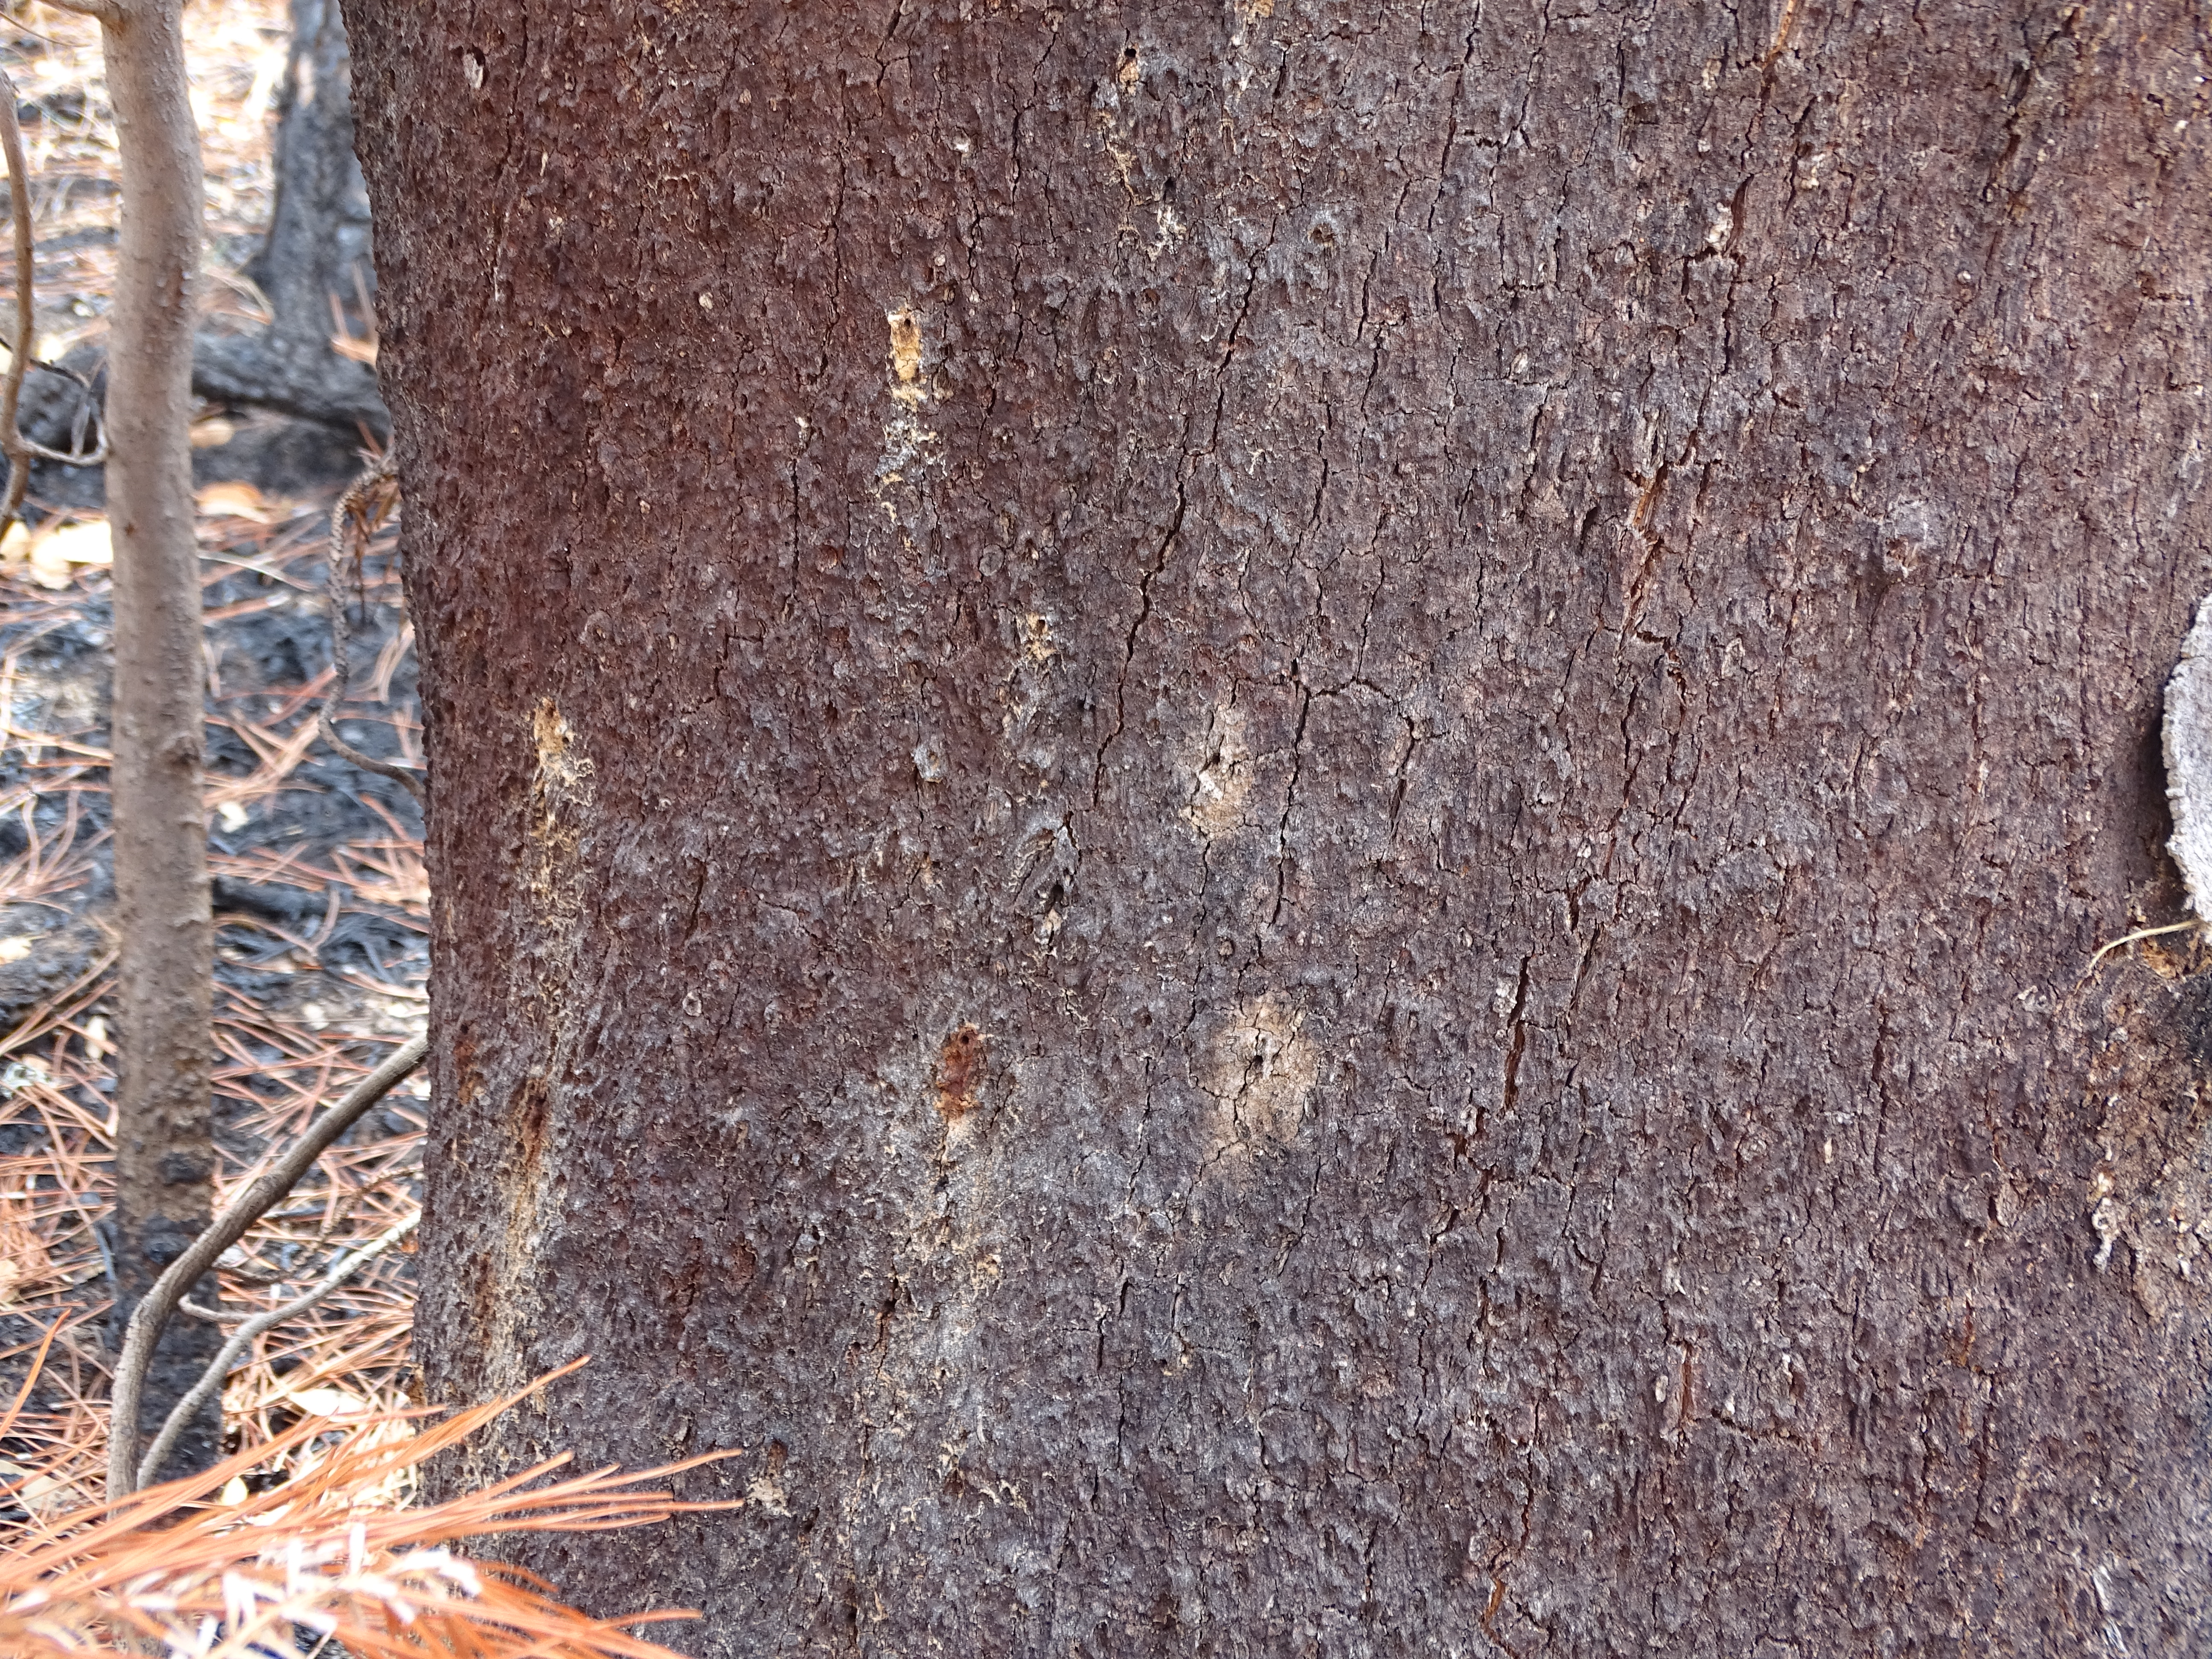 Sawdust expeled from the platypus holes in the cork oak trunk.
Photo credit: APFC - Coruche Private Landowners Association
